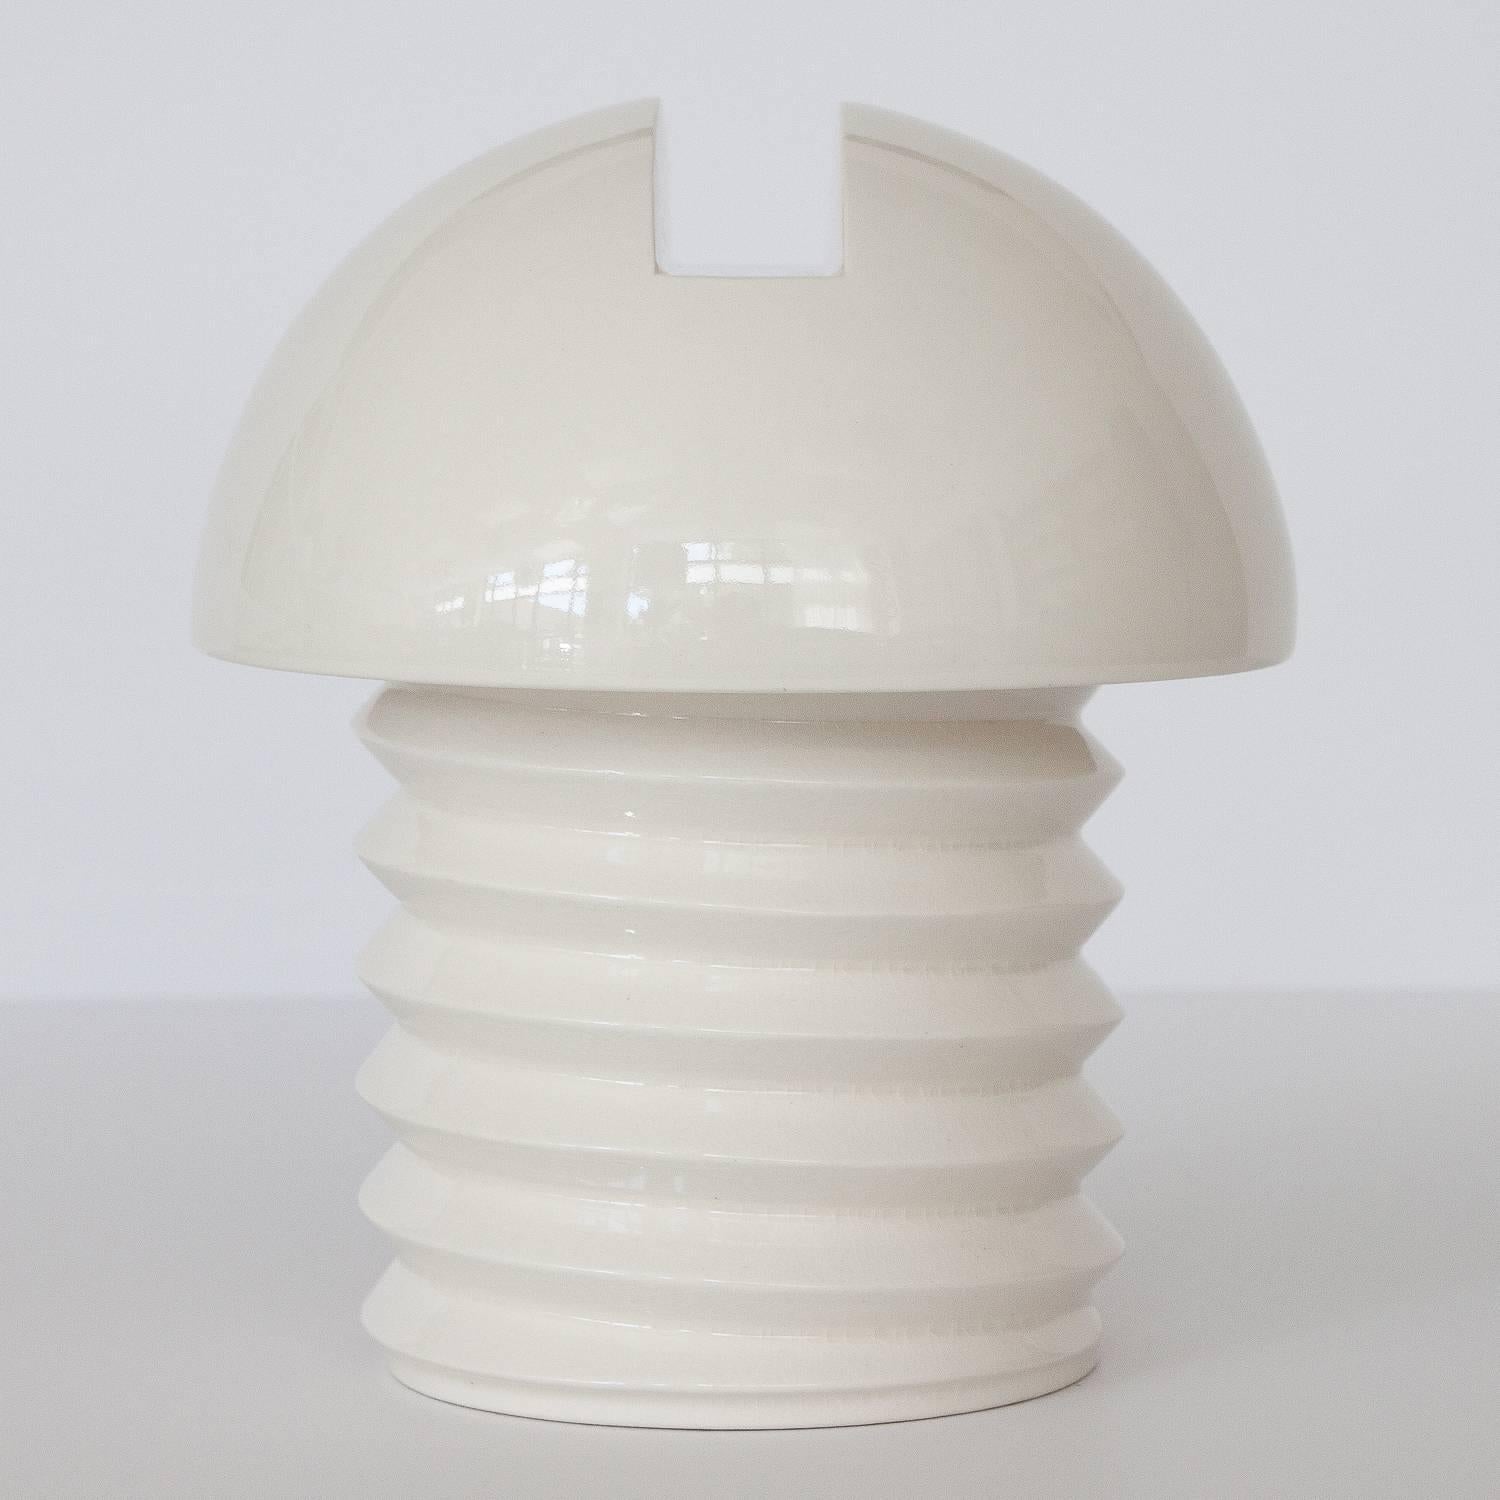 A unique 1960s Pop Art screw shaped white ceramic lidded jar. A functional and sculptural work of art. Label intact: AES Japan.